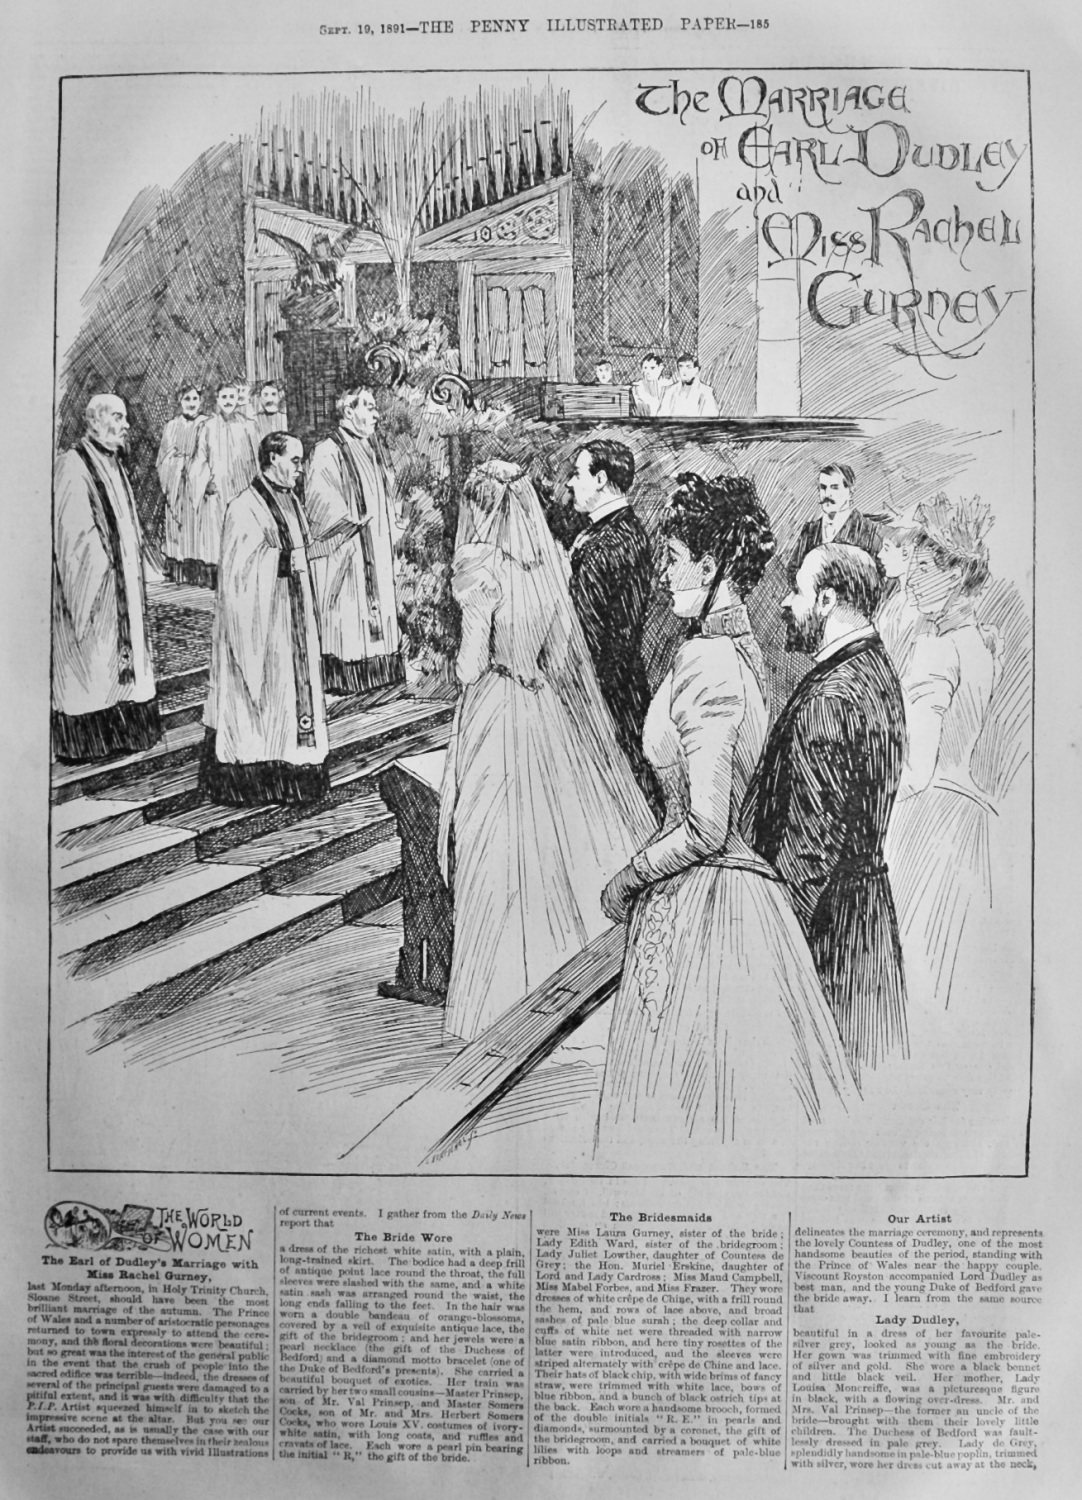 The Marriage of Earl Dudley and Miss Rachel Gurney.  1891.